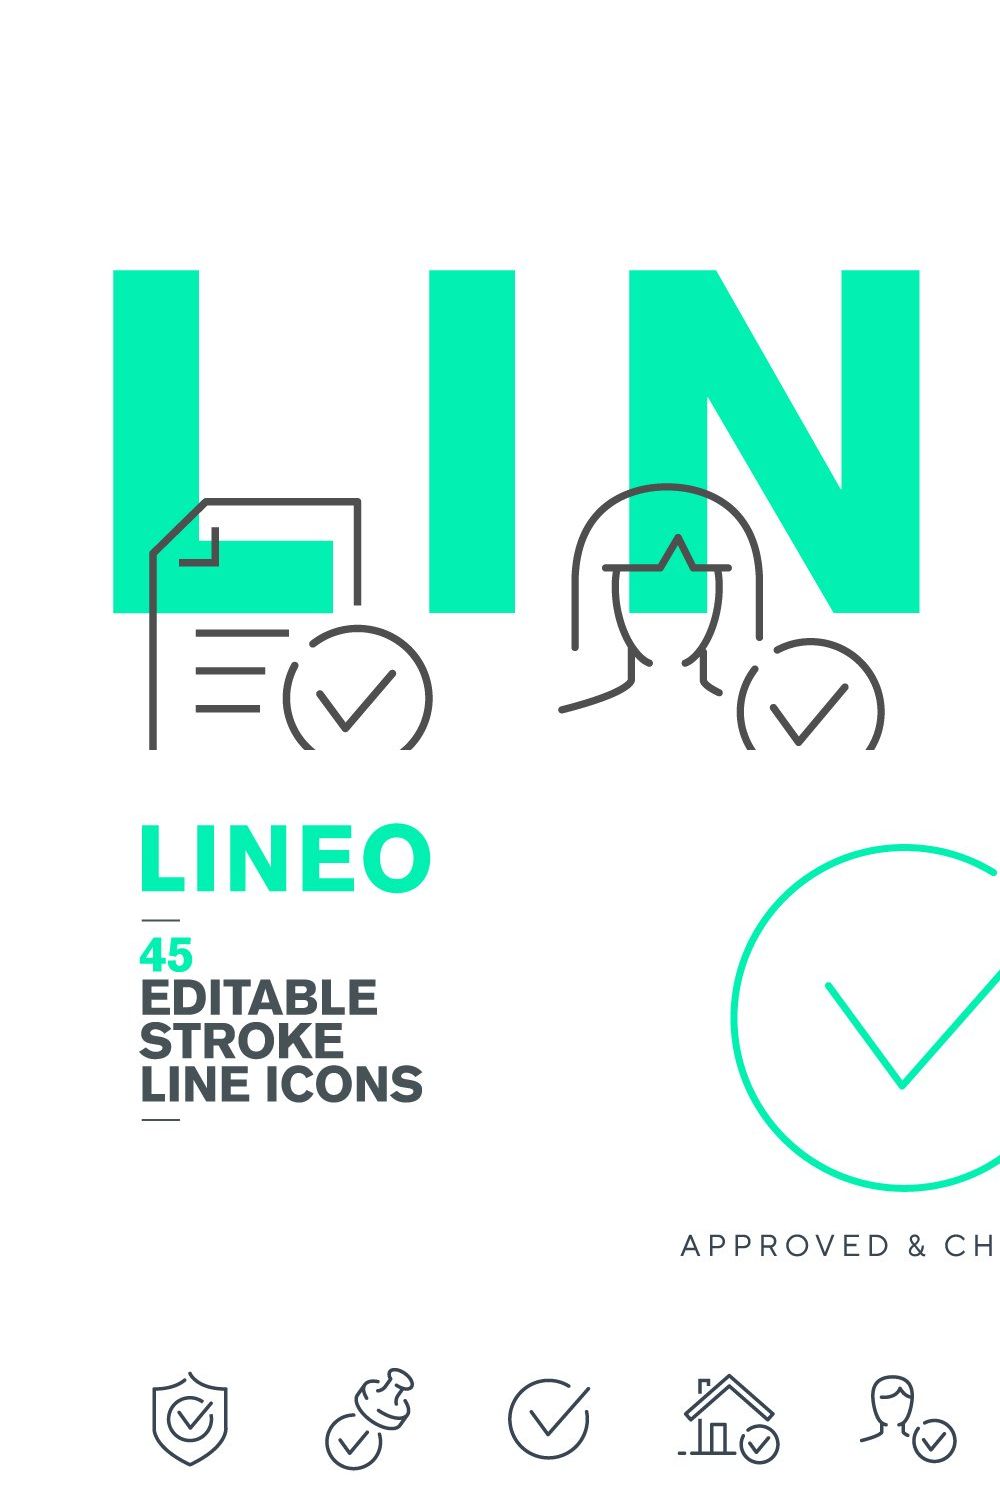 LINEO - 45 APPROVE ICONS pinterest preview image.